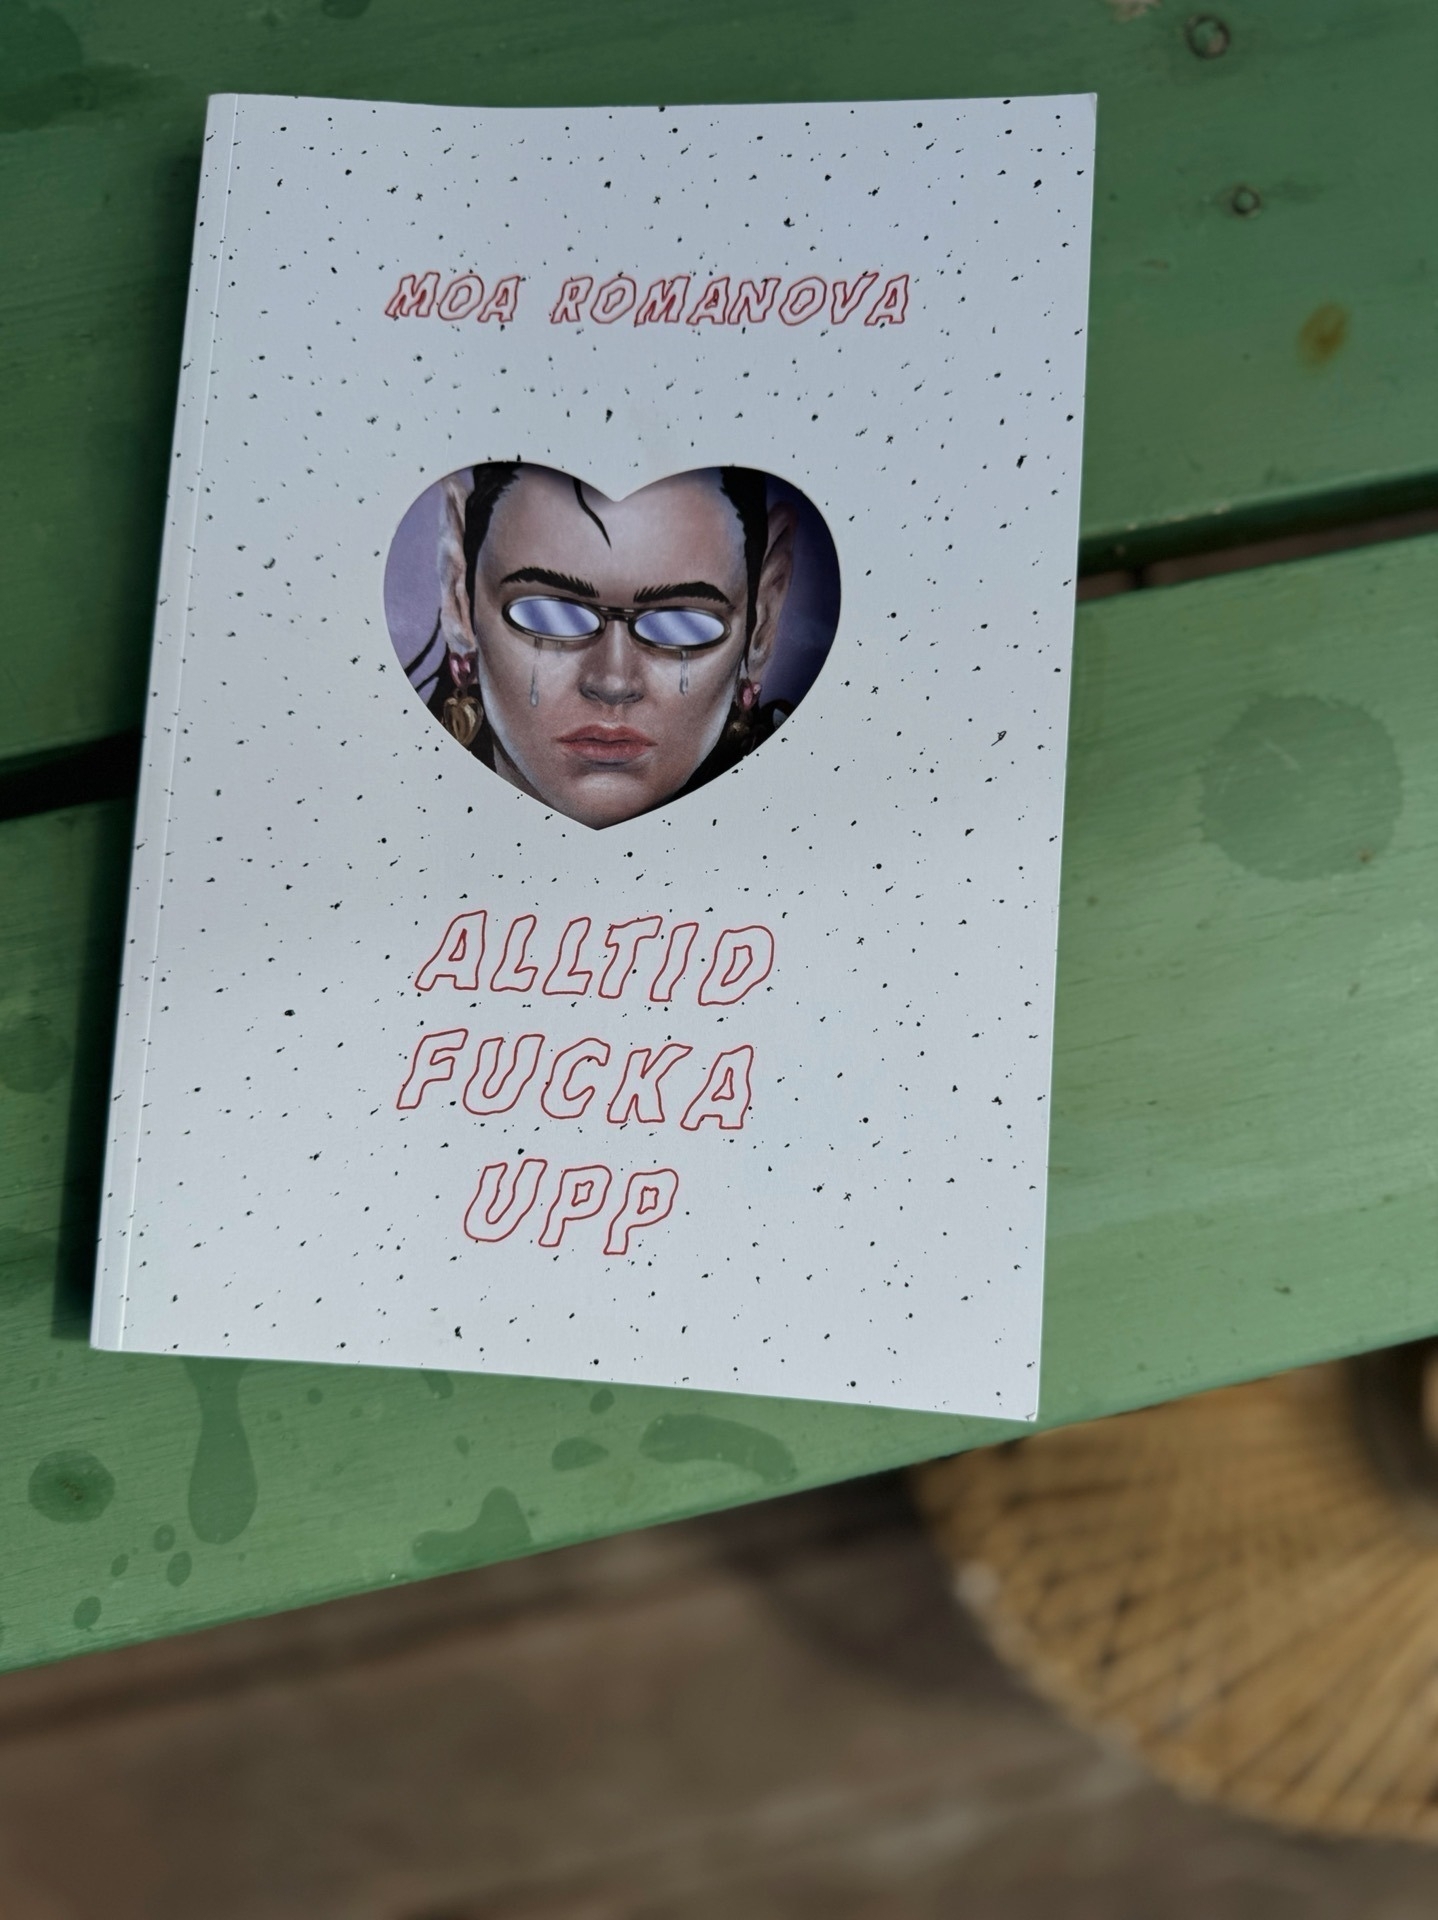 The book’s cover features a heart-shaped cutout showing an illustration of a person’s face with glasses and teardrops. The title is written in red, capitalized letters.